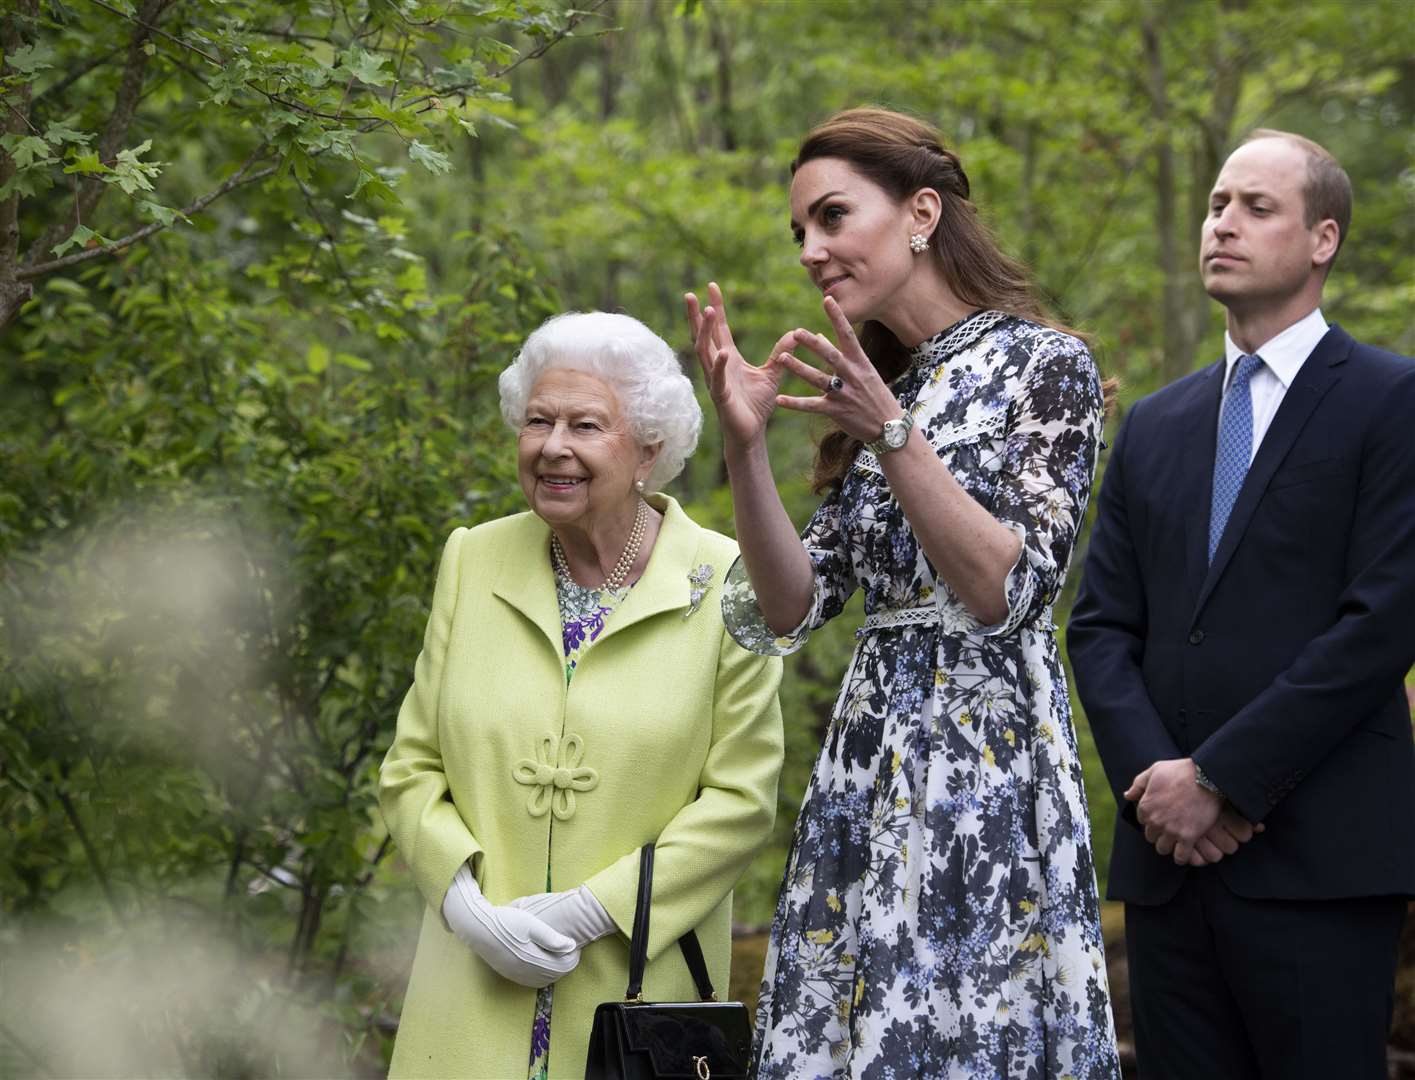 Queen Elizabeth II and the Duke and Duchess of Cambridge at the RHS Chelsea Flower Show last year. Photo: Geoff Pugh/PA Wire